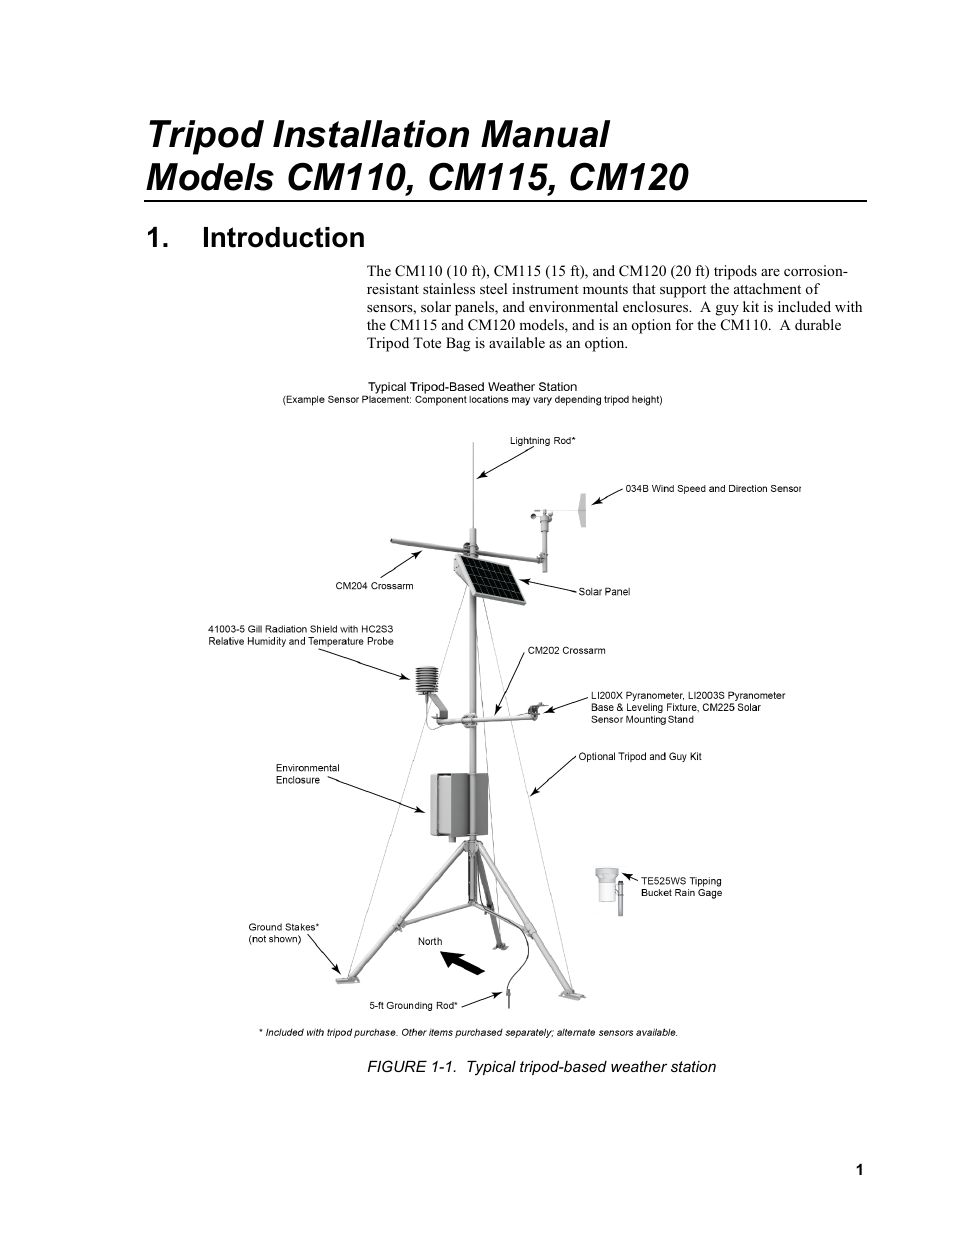 Introduction, 1. typical tripod-based weather station | Campbell Scientific CM110, CM115, CM120 Tripod Installation User Manual | Page 9 / 40